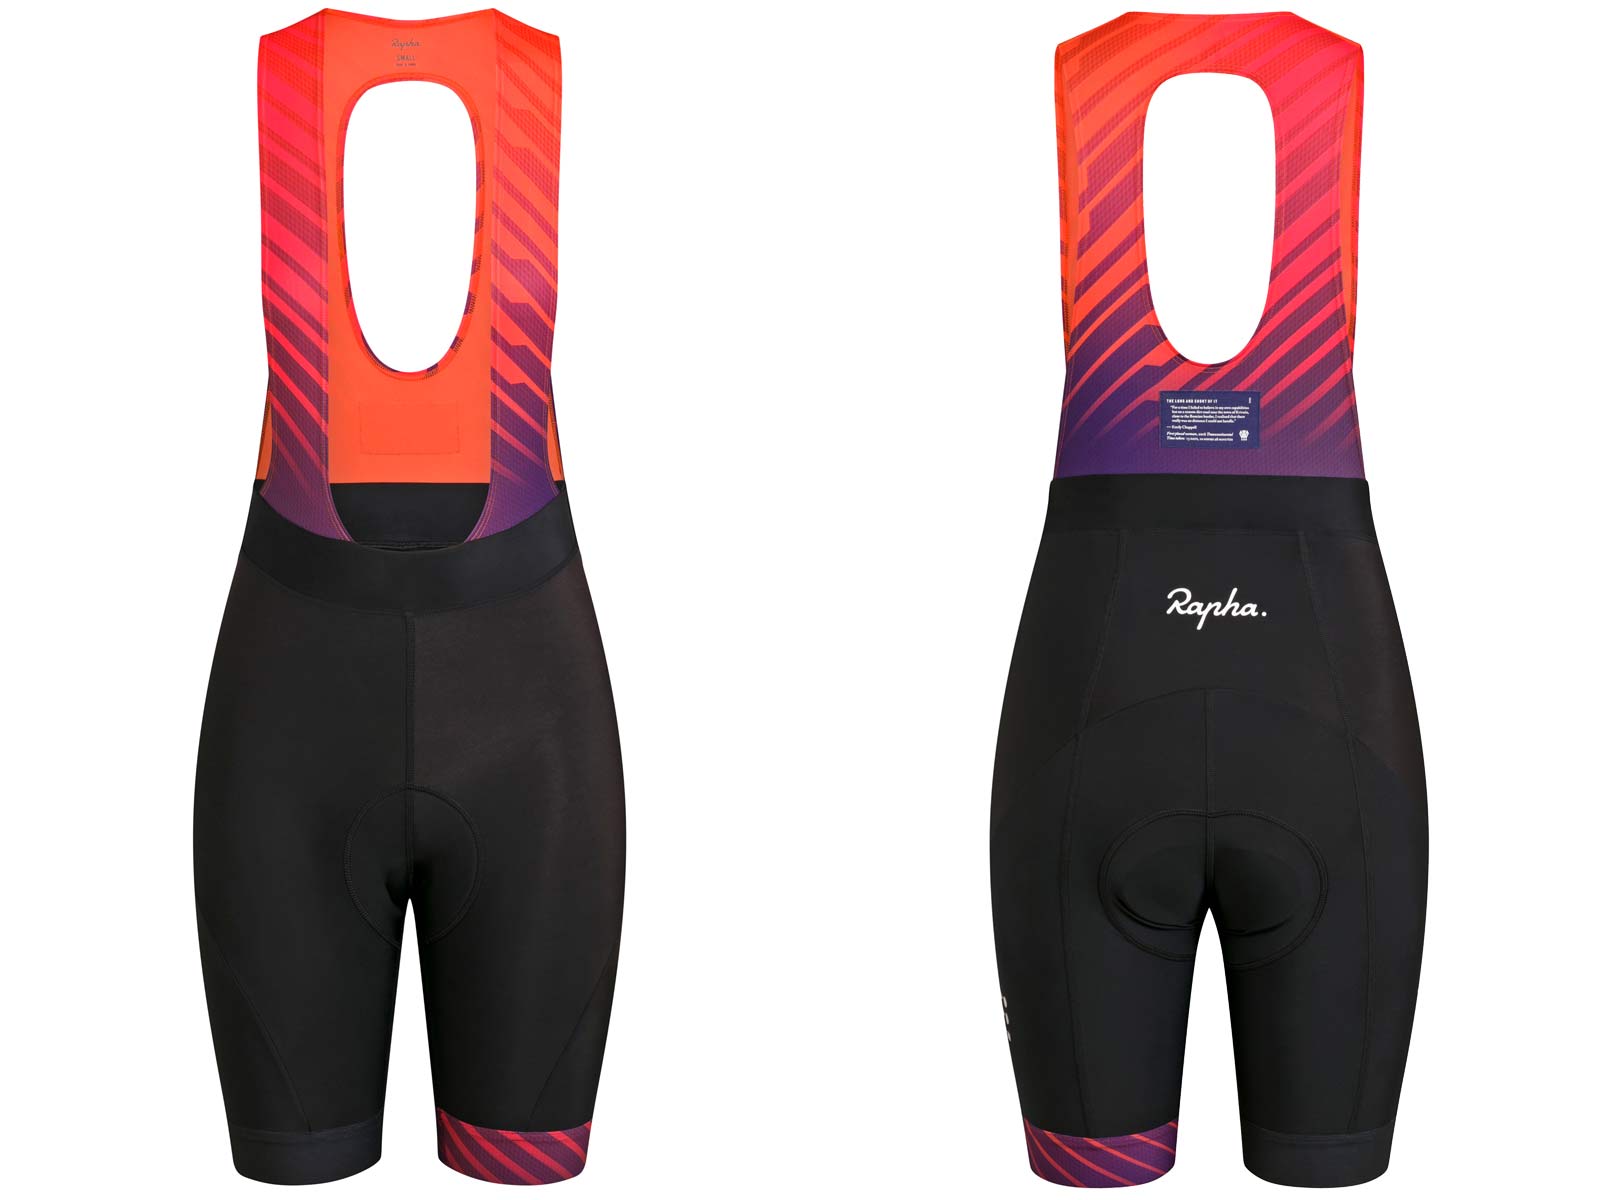 2019 Rapha Women's 100, limited edition cycling kit to promote women cycling